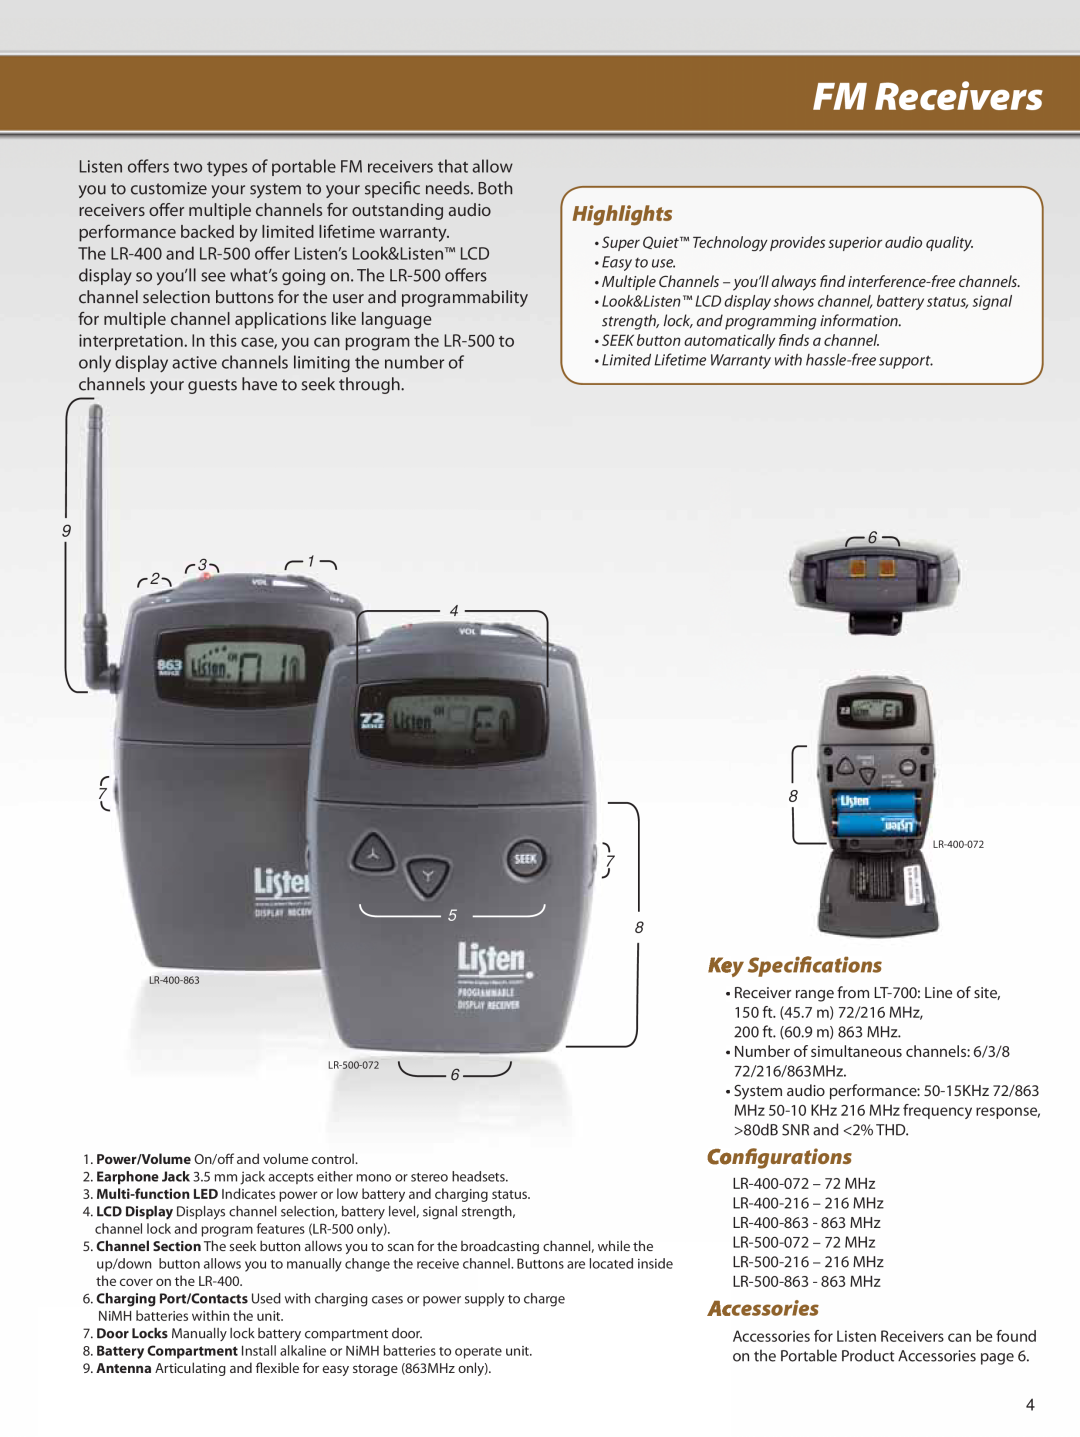 Listen Technologies Portable FM FM Receivers, Highlights, Key Specifications, Configurations, Accessories, Easy to use 